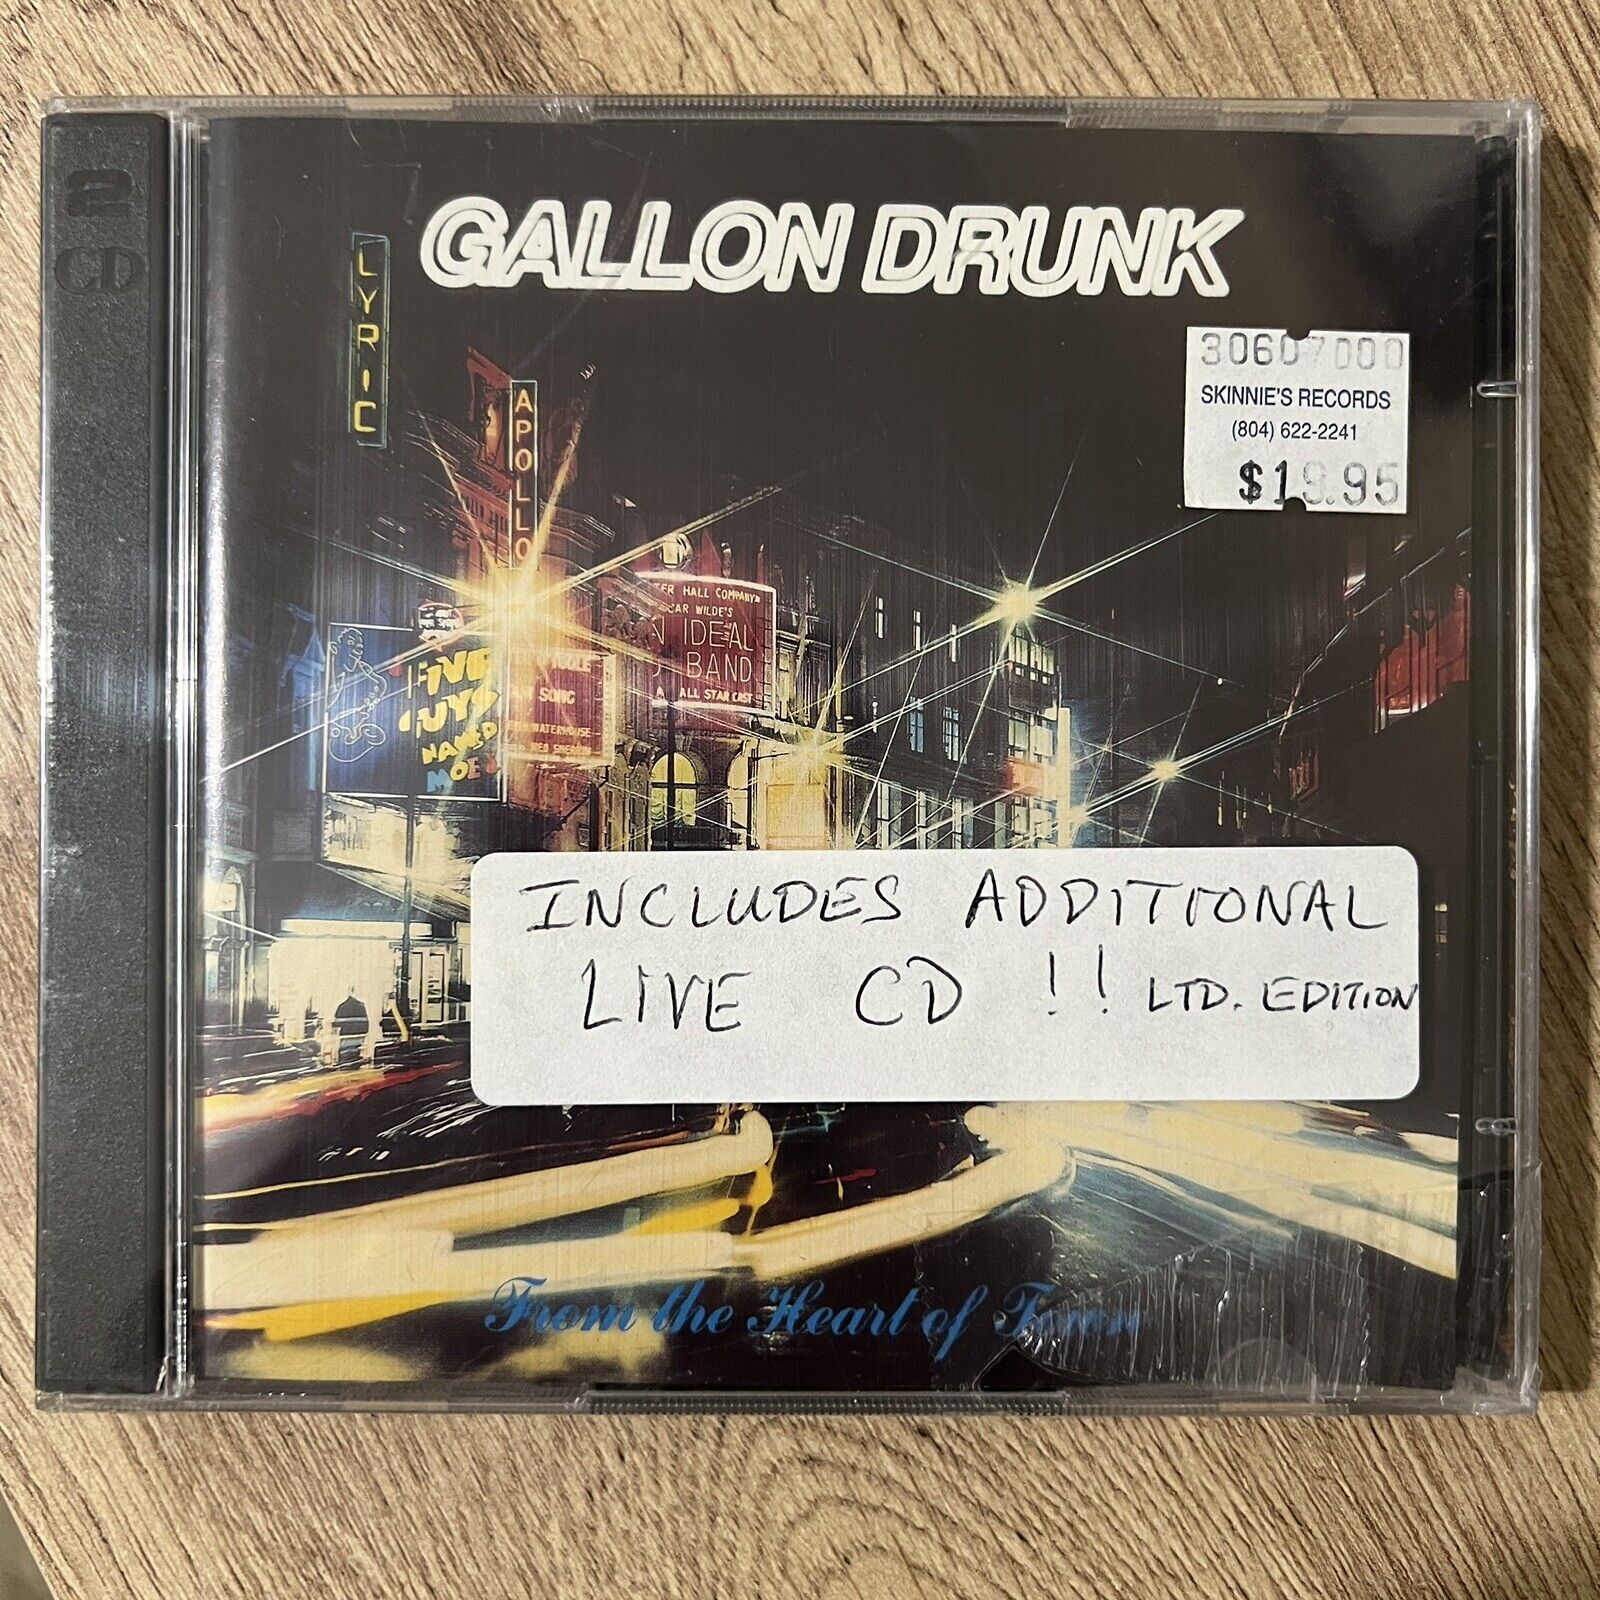 Gallon Drunk - From The Heart Of Town (CD, Album + Ltd Edition Live CD) /1000